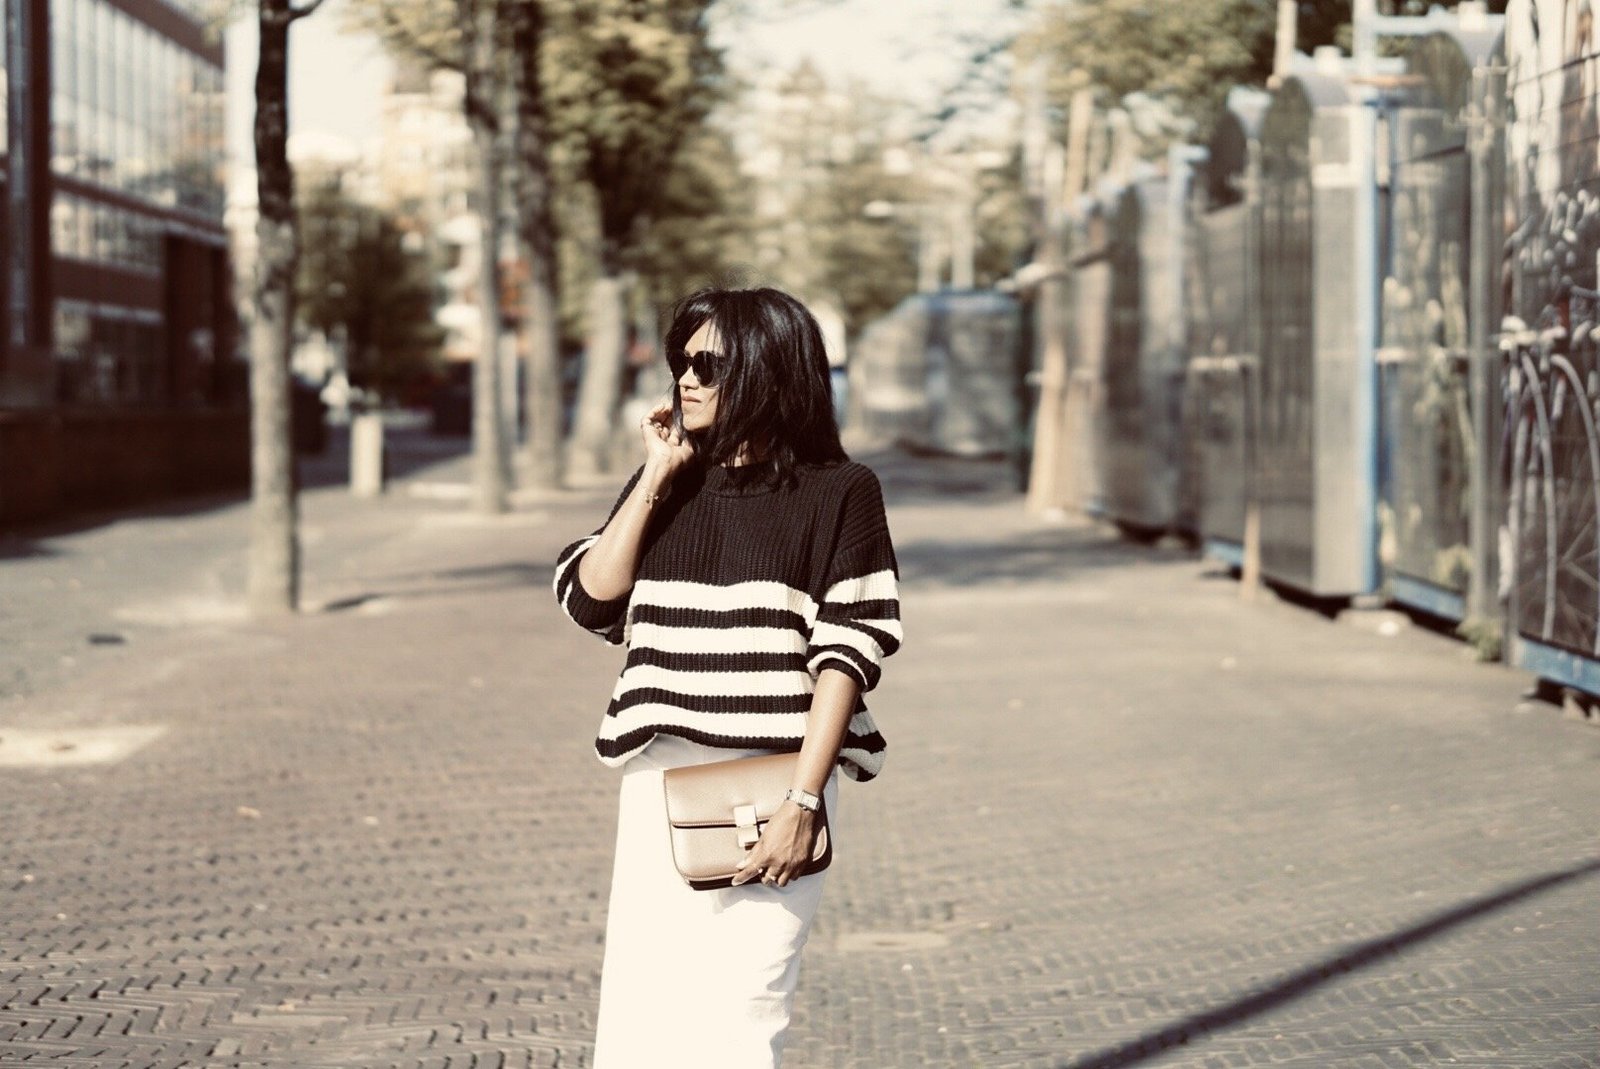 Sachini wearing black and white knitwear, white culottes holding a brown Celine bag